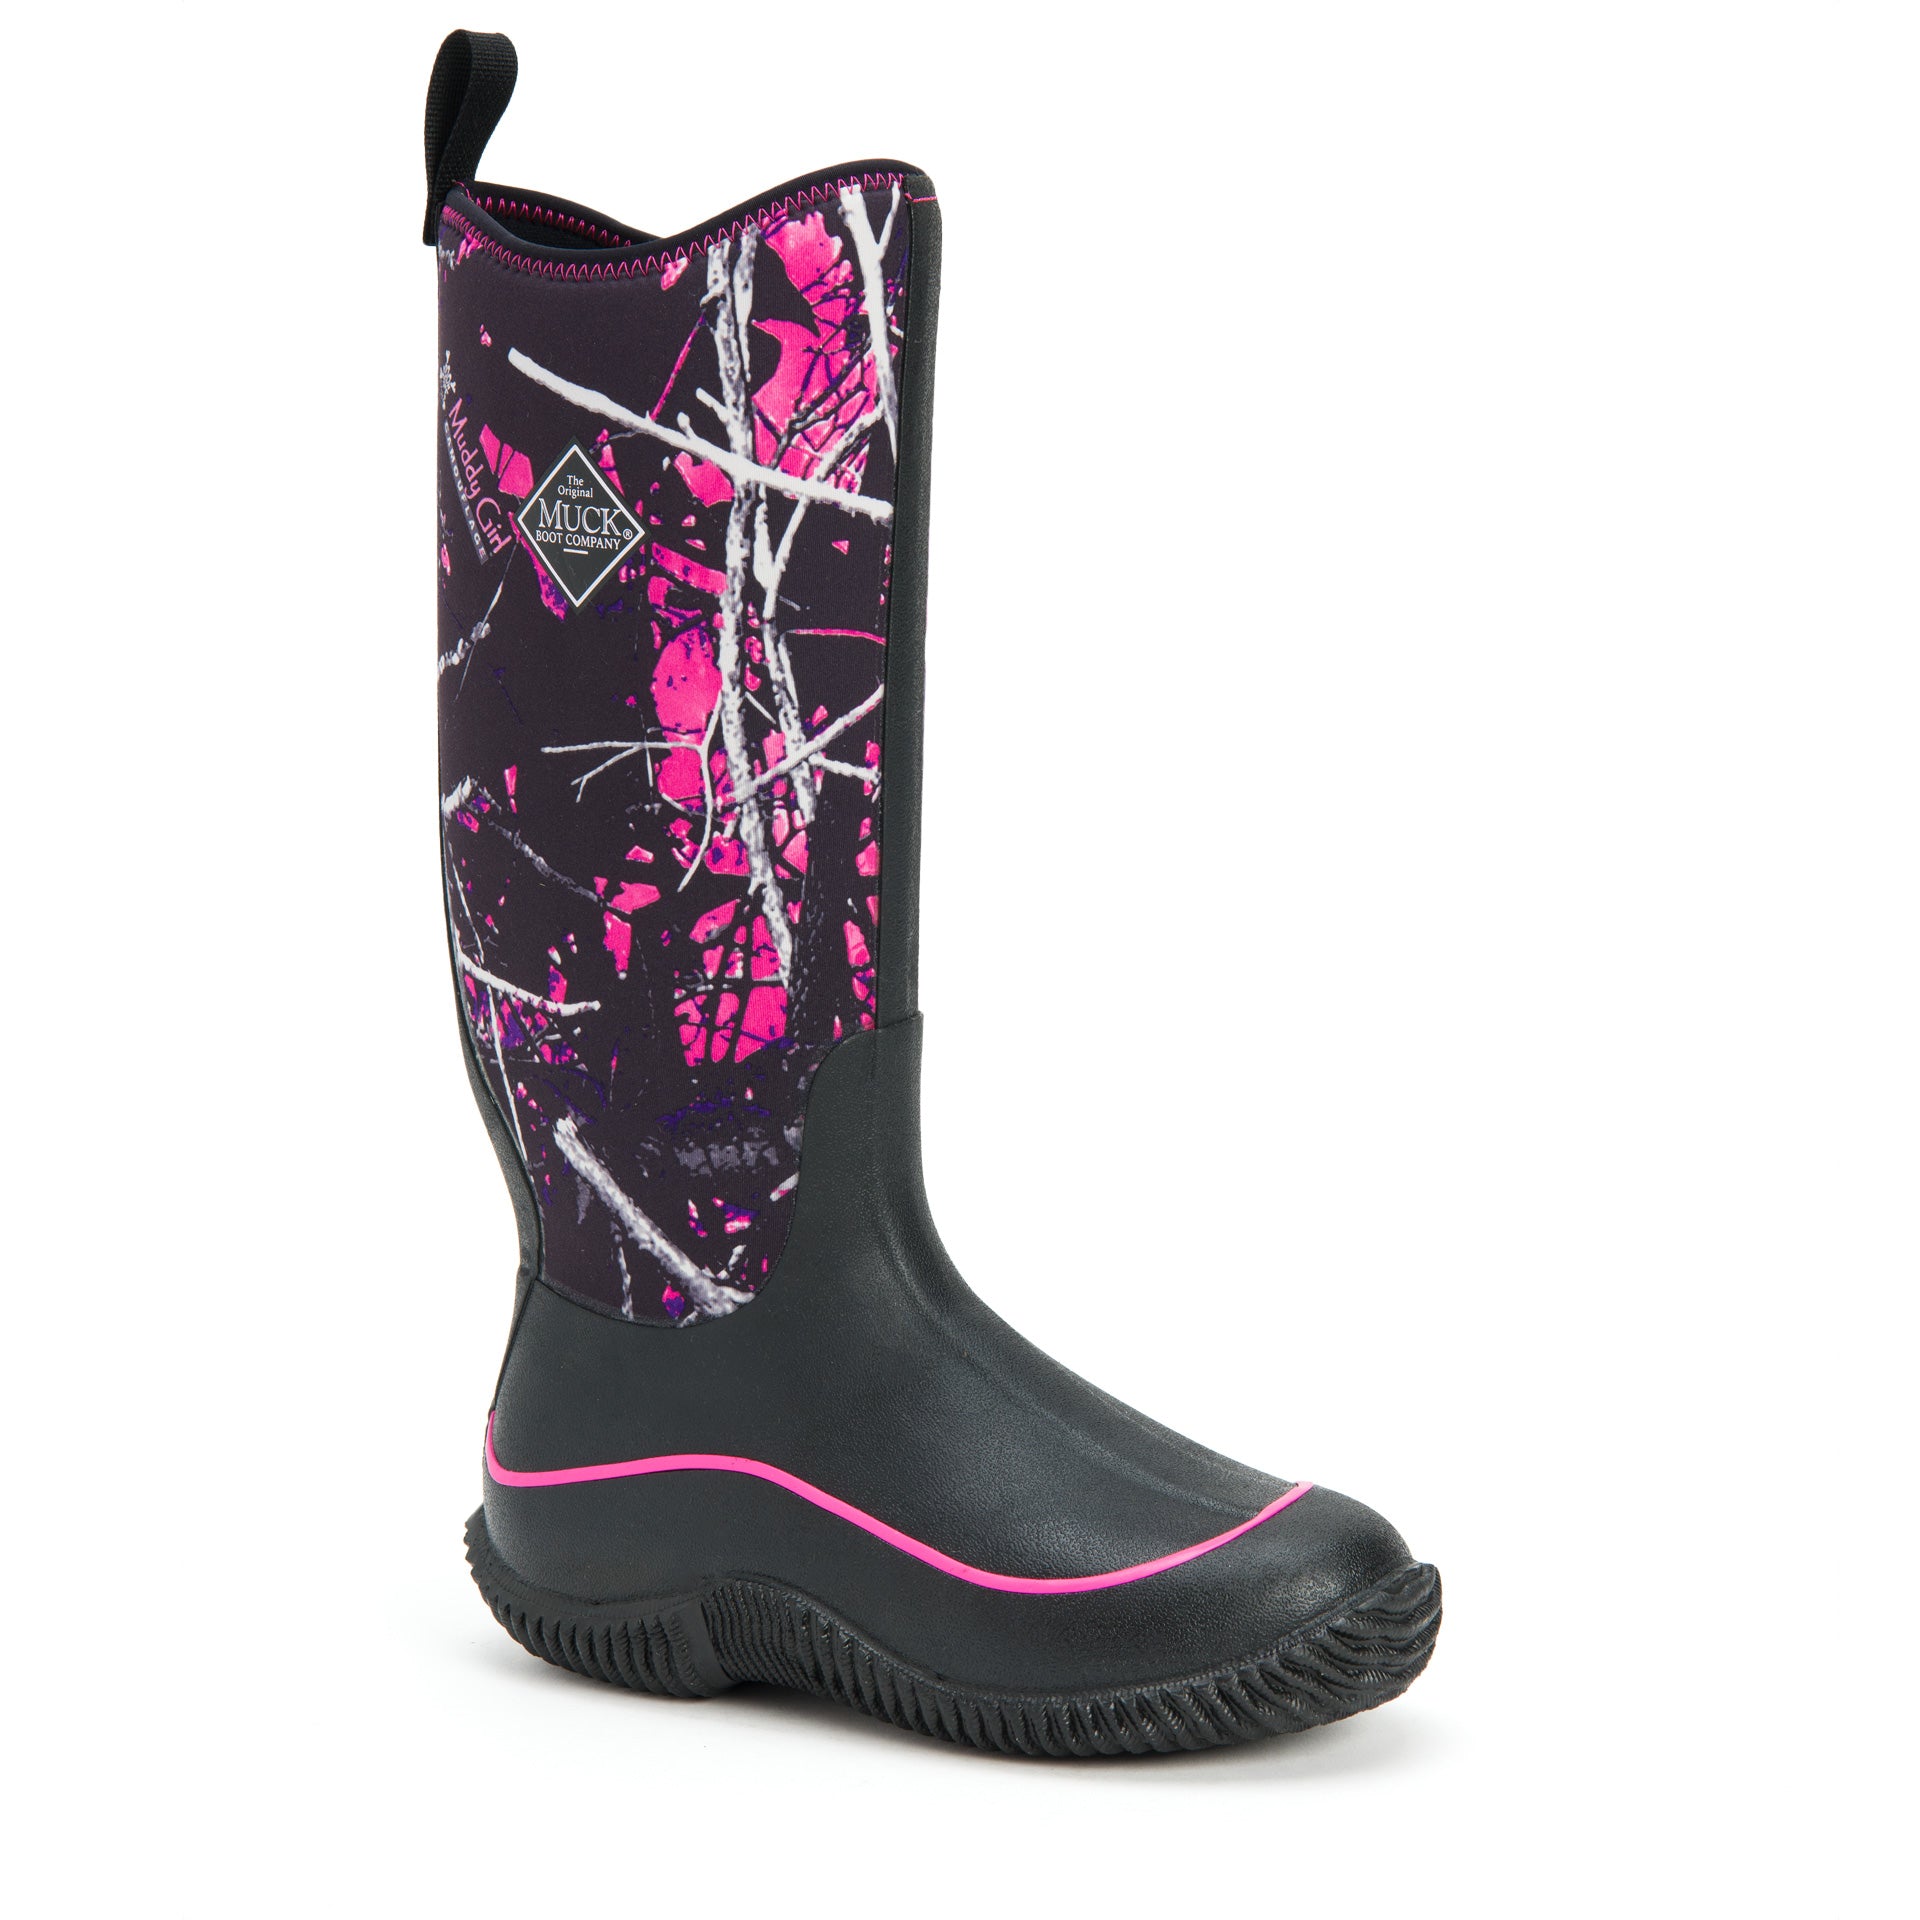 womens camo rubber boots